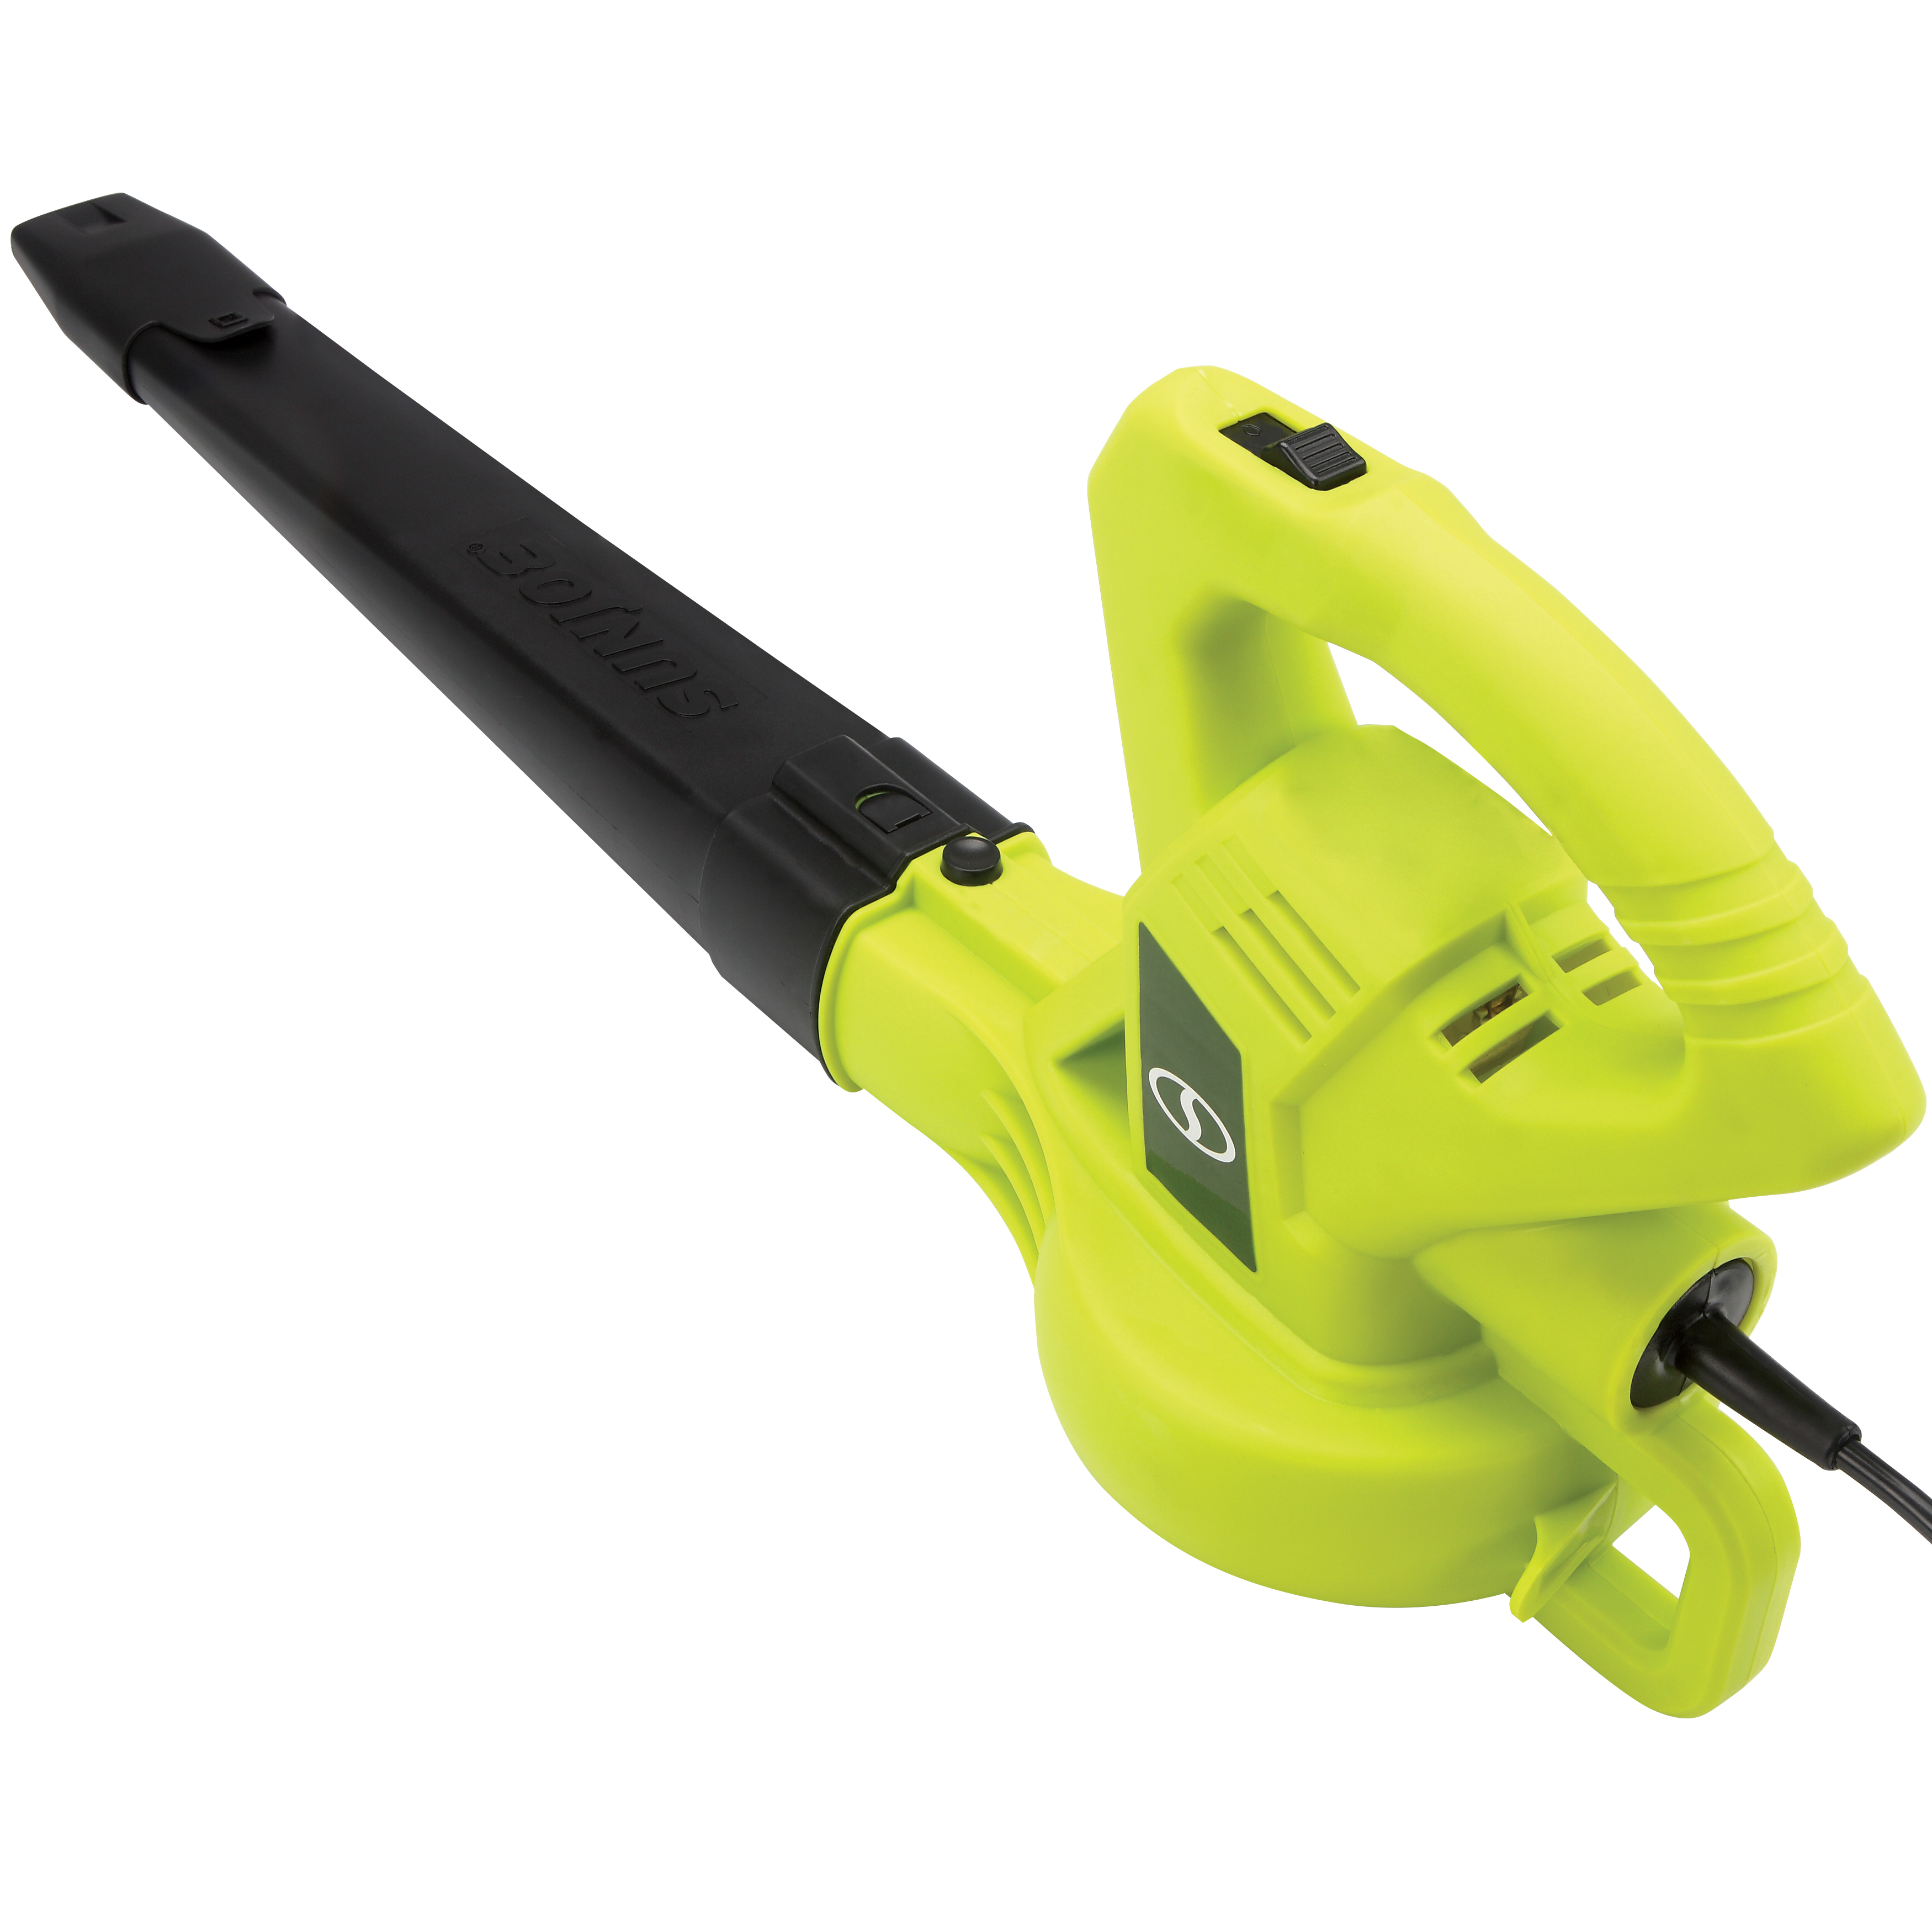 New Green Amp 215 Max MPH All-Purpose 2-Speed Electric Blower 